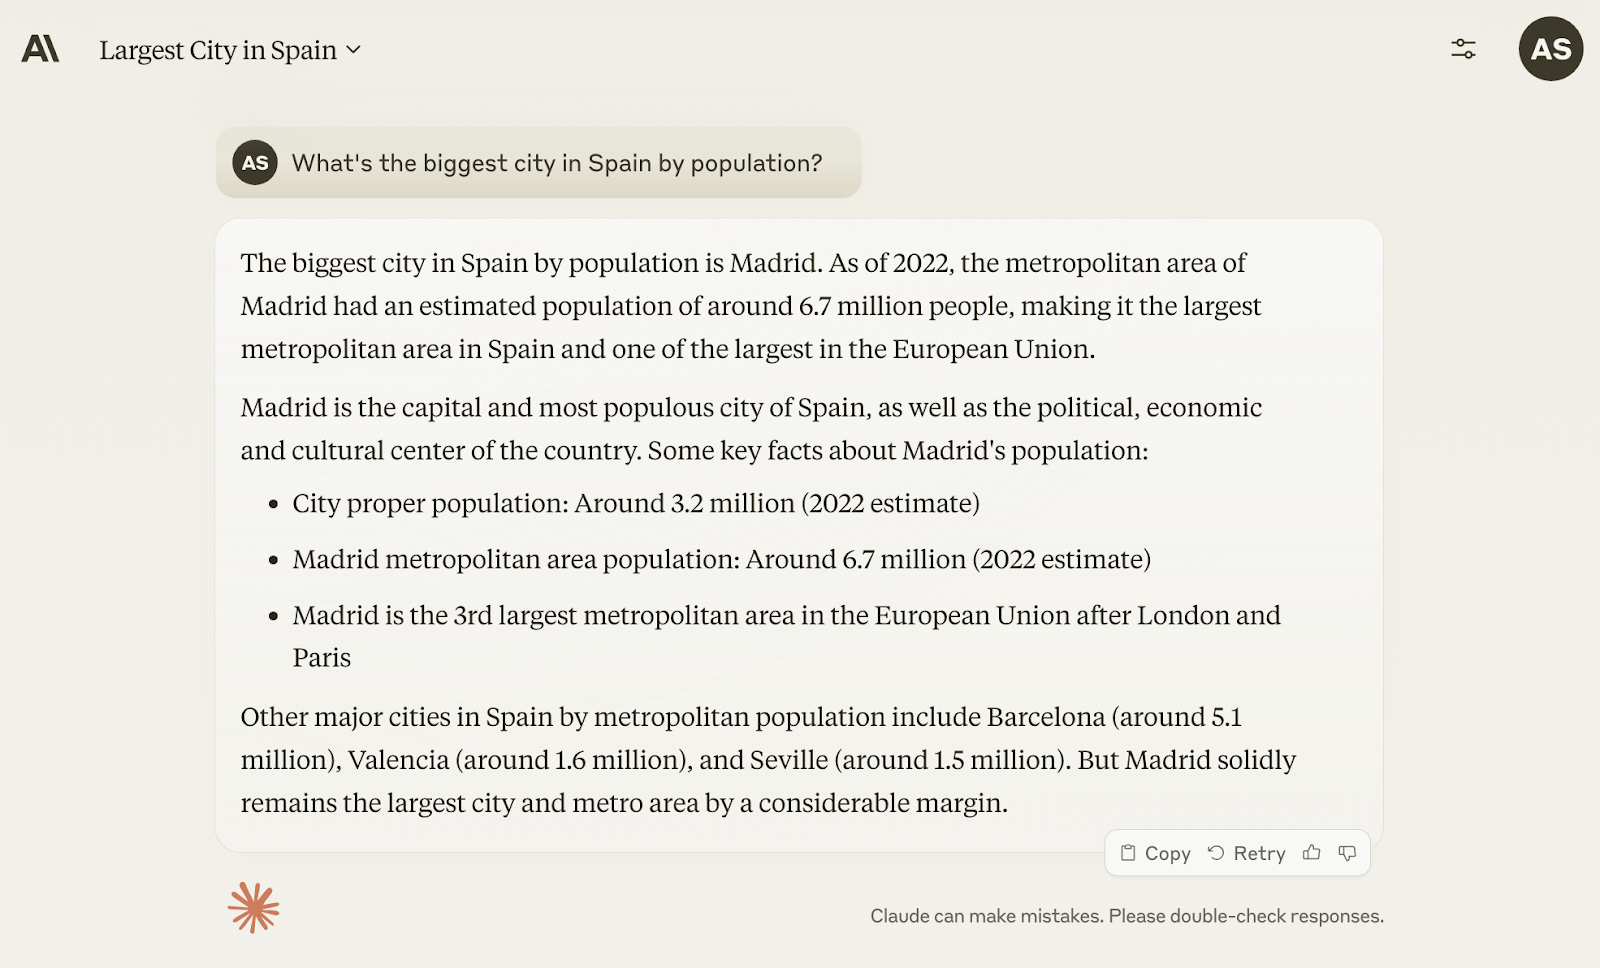 Claude chatbot response to the question 'What is biggest city in Spain by population?'